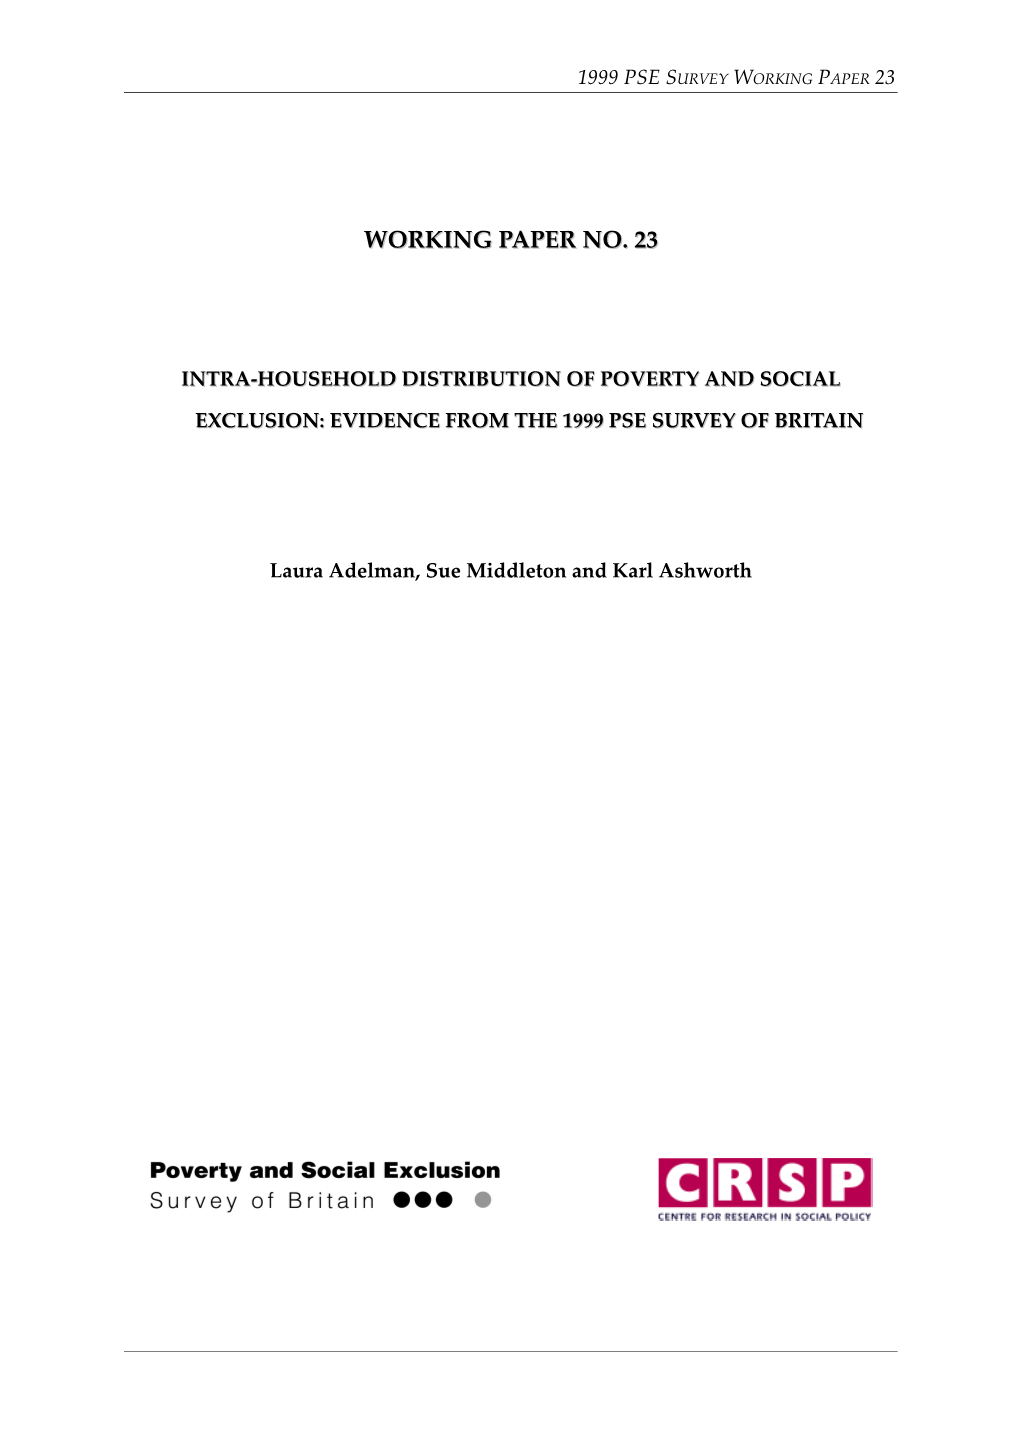 Management of Household Finances and Intra-Household Poverty